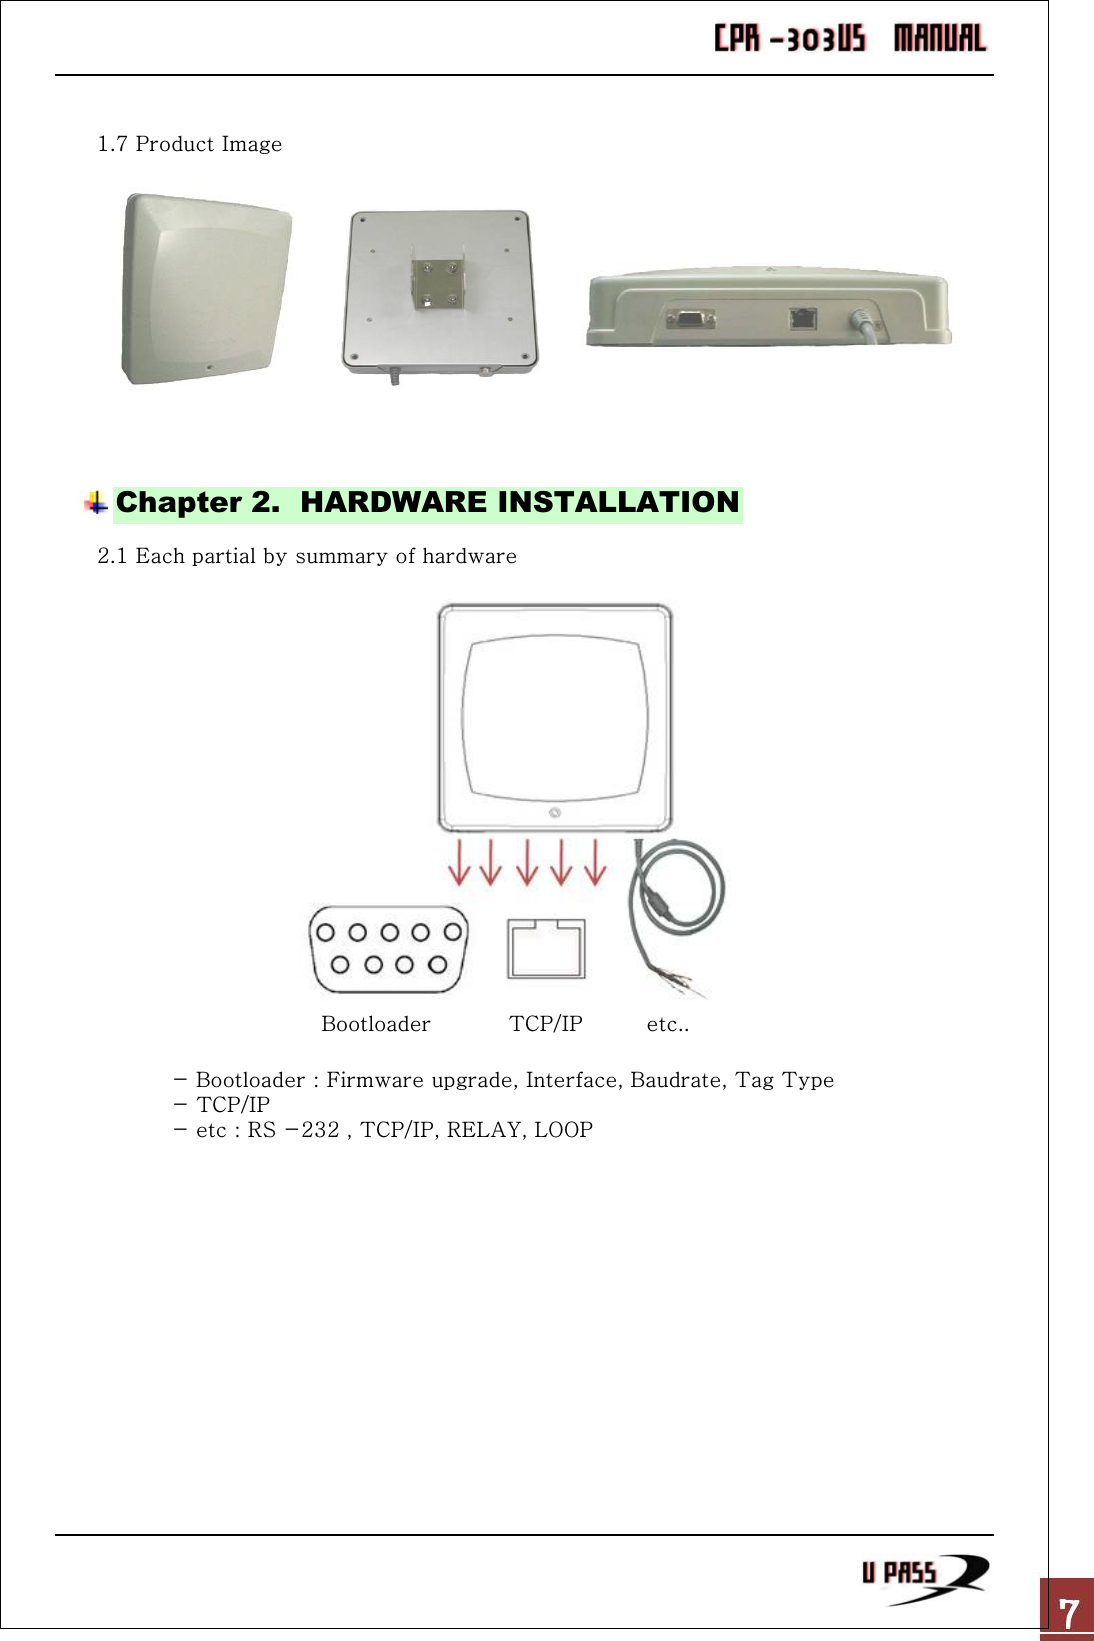 1.7 Product ImageChapter 2.  HARDWARE INSTALLATION2.1 Each partial by summary of hardwareBootloader TCP/IP  etc..- Bootloader : Firmware upgrade, Interface, Baudrate, Tag Type - TCP/IP - etc : RS -232 , TCP/IP, RELAY, LOOP                  